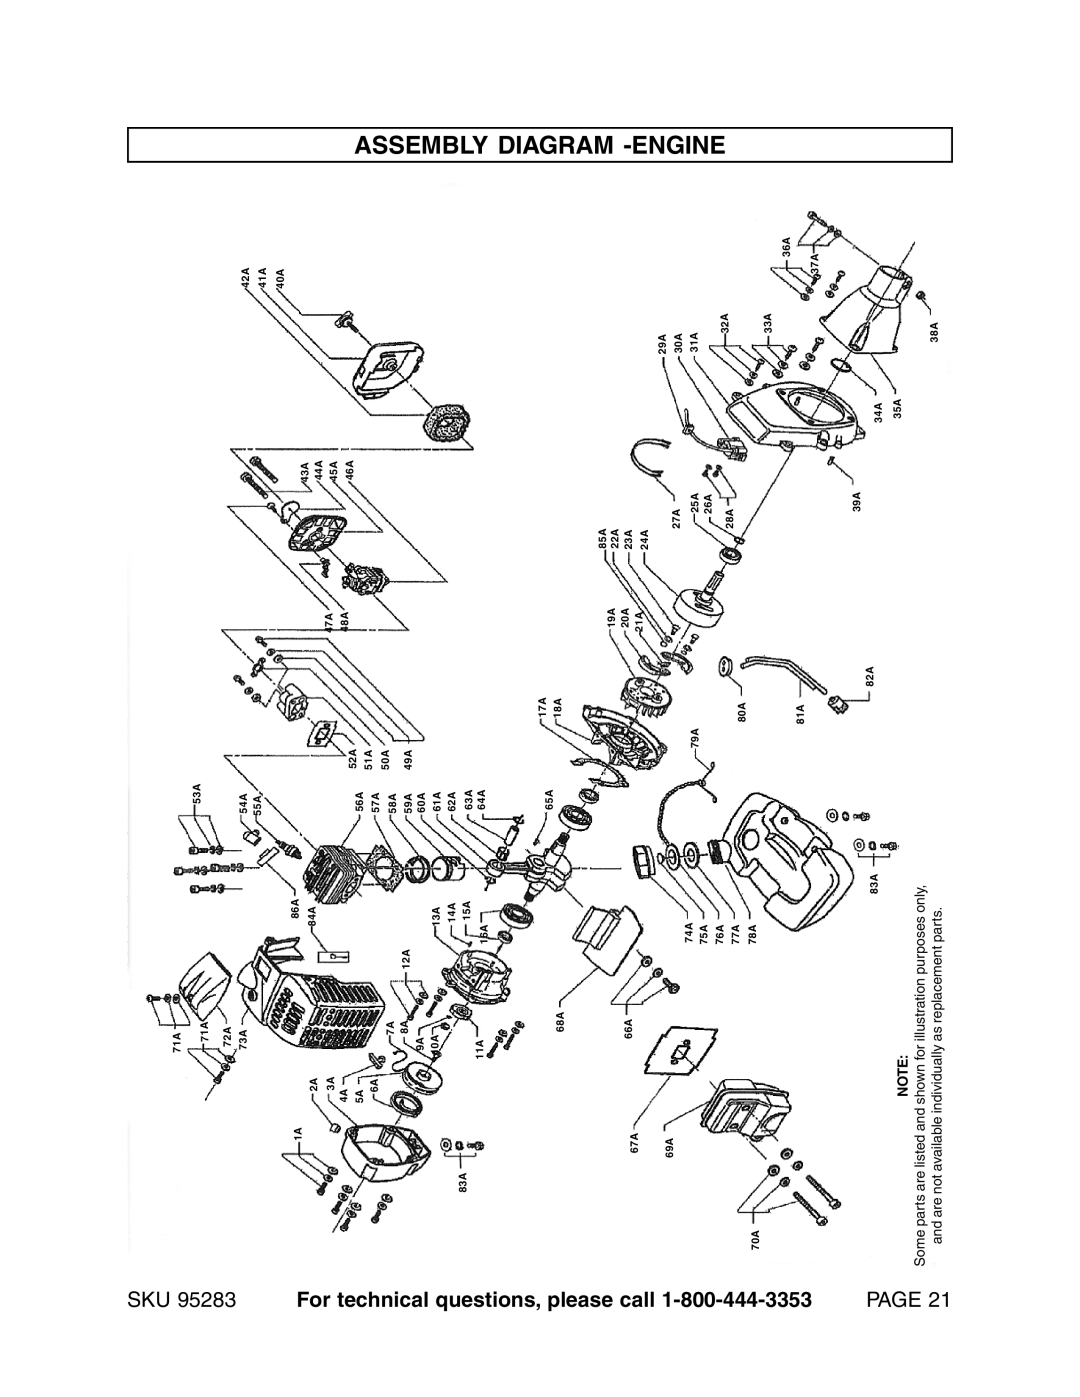 Chicago Electric 95283 Assembly Diagram -Engine, For technical questions, please call, Page, illustration purposes only 